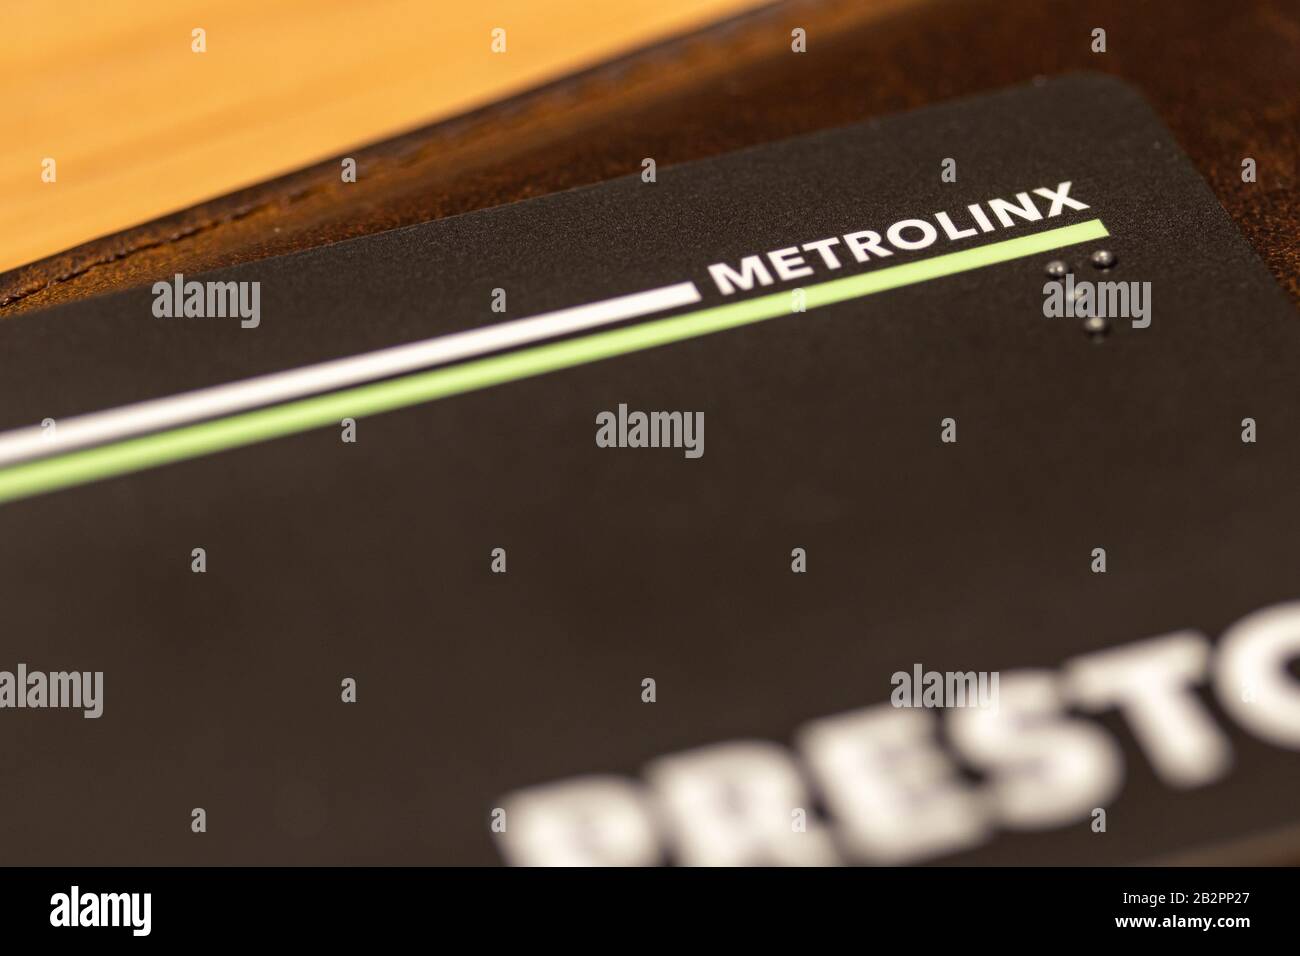 Metrolink The Crown Agency That Operates The Public Transit In The Toronto Area Logo In Focus On A Presto Card Atop Of A Wallet Stock Photo Alamy